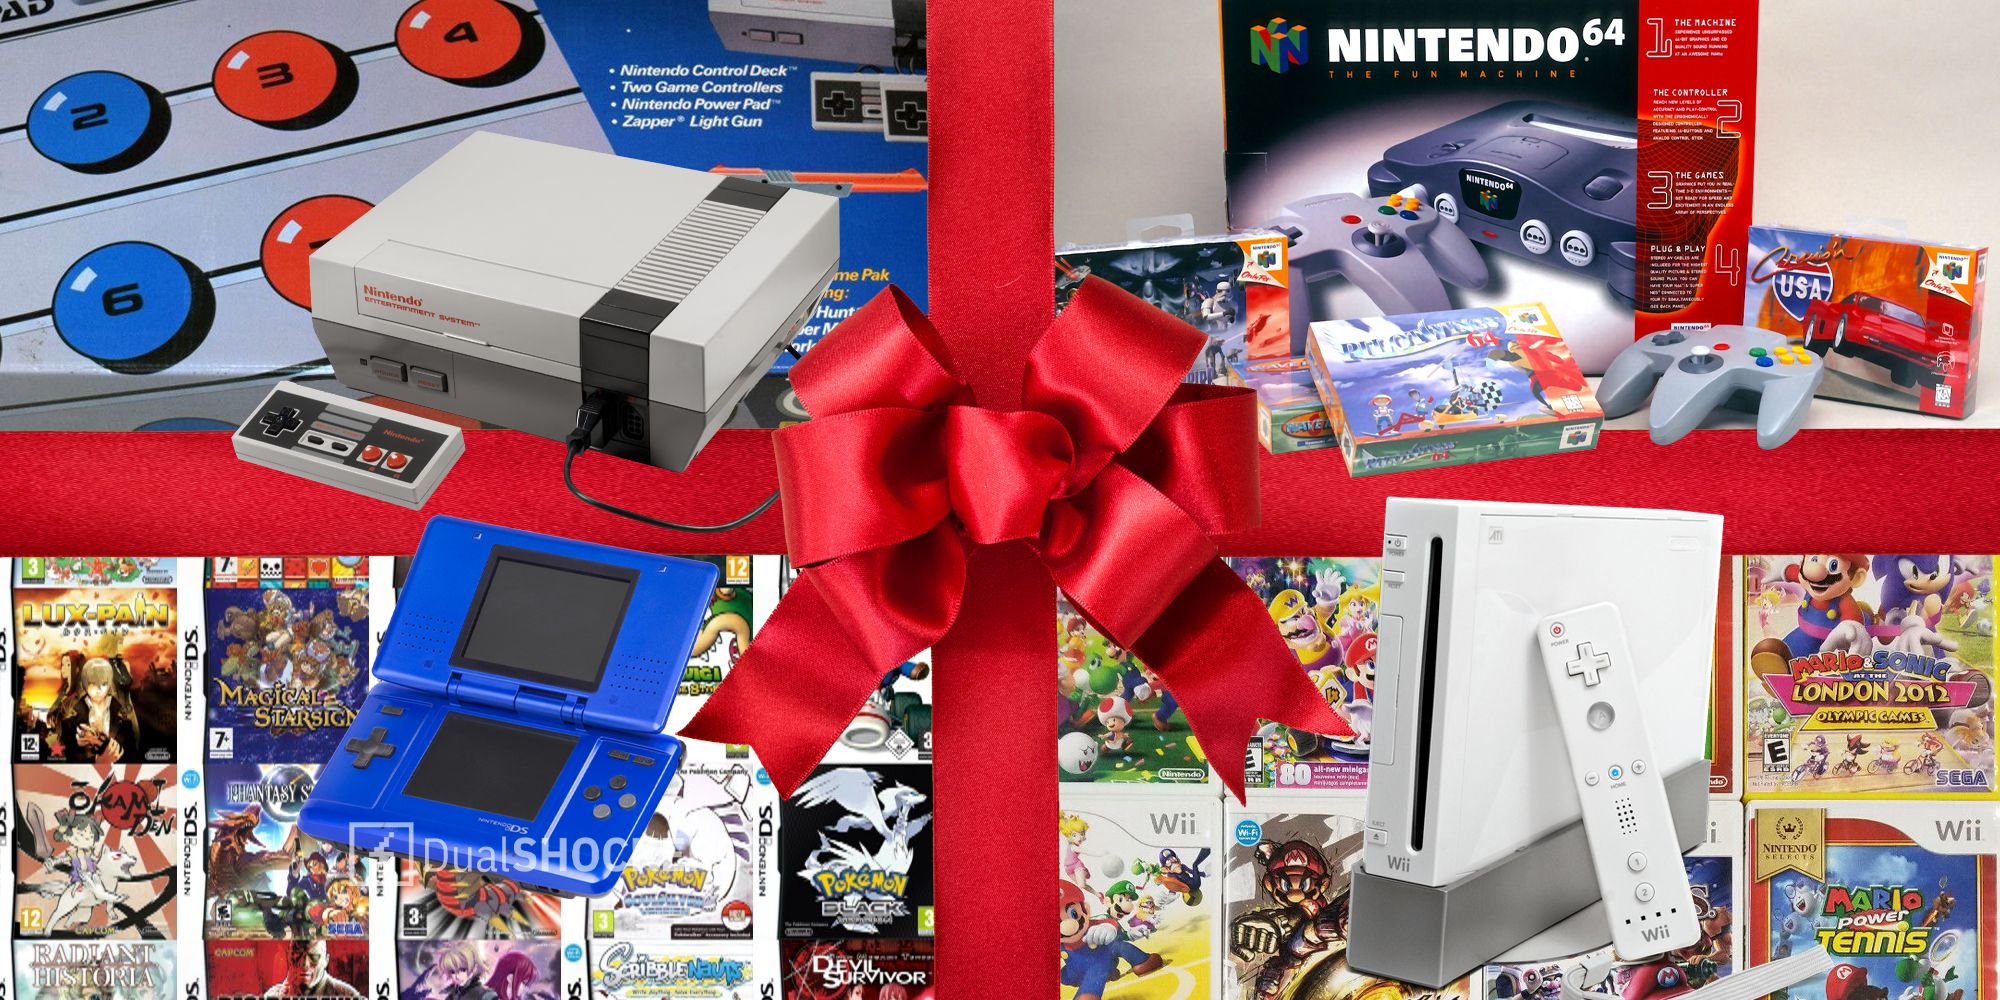 Red bow with Nintendo Entertainment System Power Set and console, Nintendo 64 console with games, Nintendo DS console with games, Nintendo Wii console with games